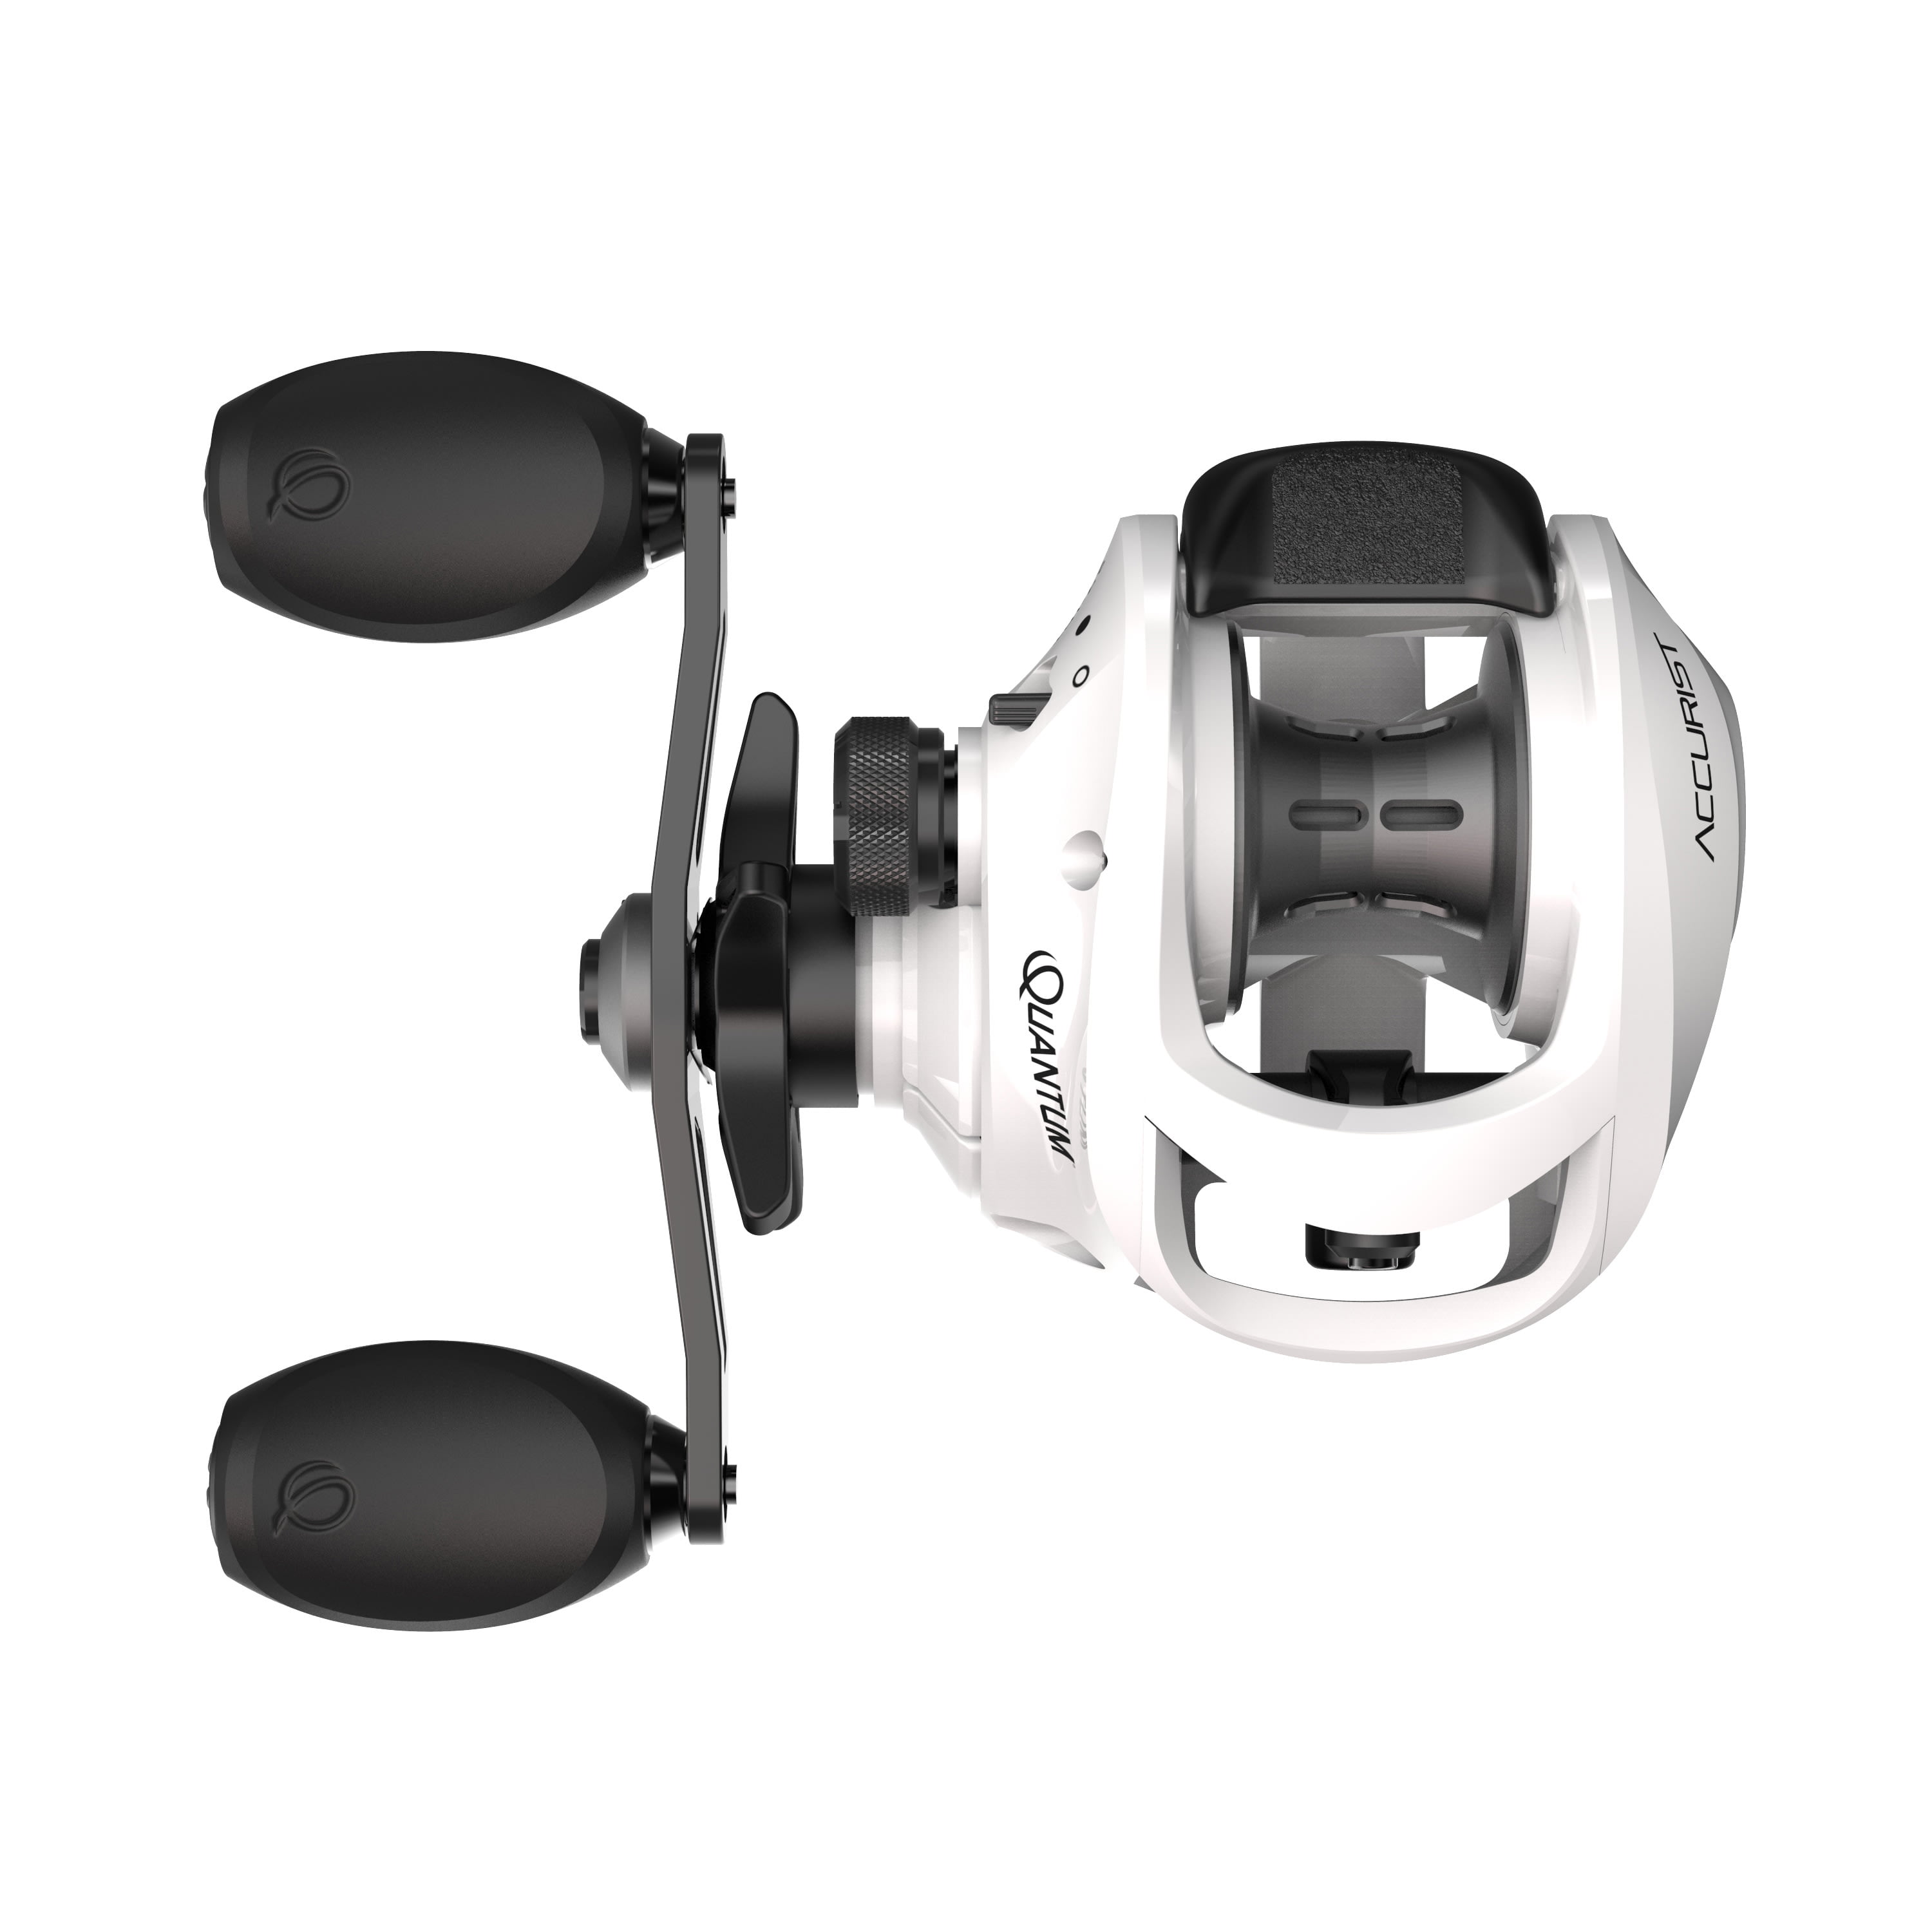 Quantum Accurist Spinning Fishing Reel, Size 25 Reel, Changeable Right